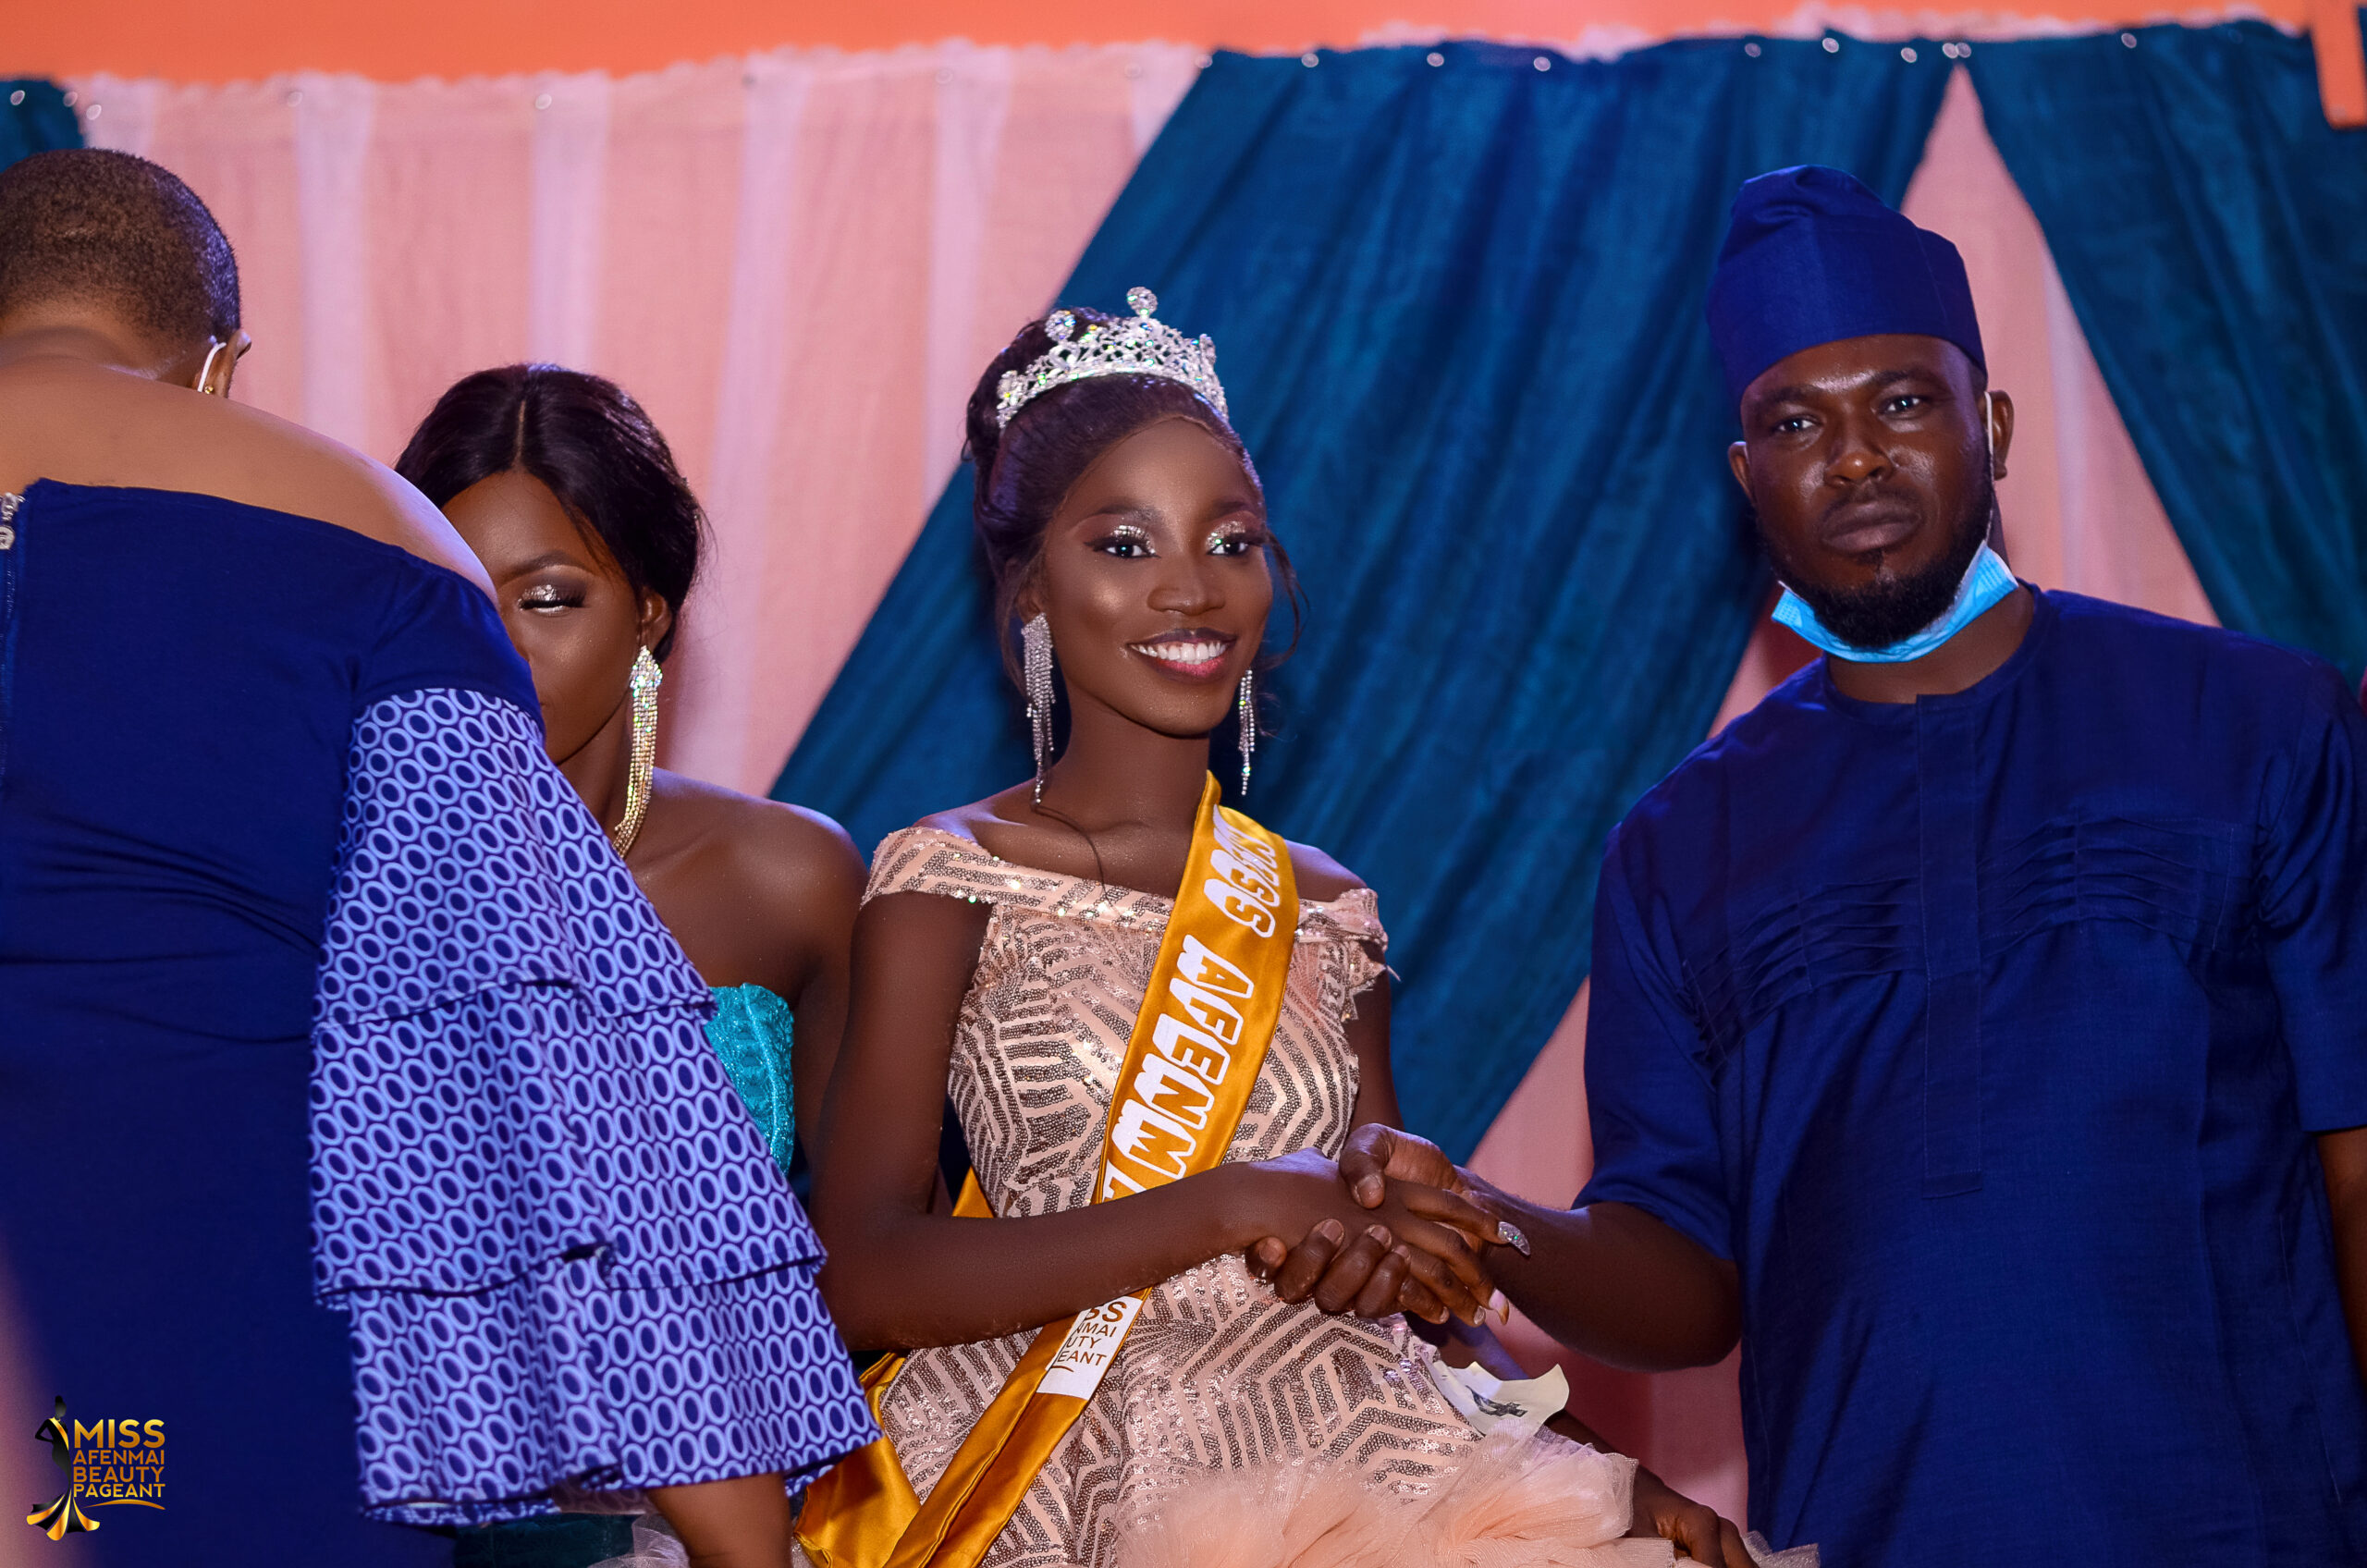 BREAKING: A New Miss Afenmai has Finally Emerged. Her name is Miss Flora Samuel from Orhiomwon LGA in Edo State.